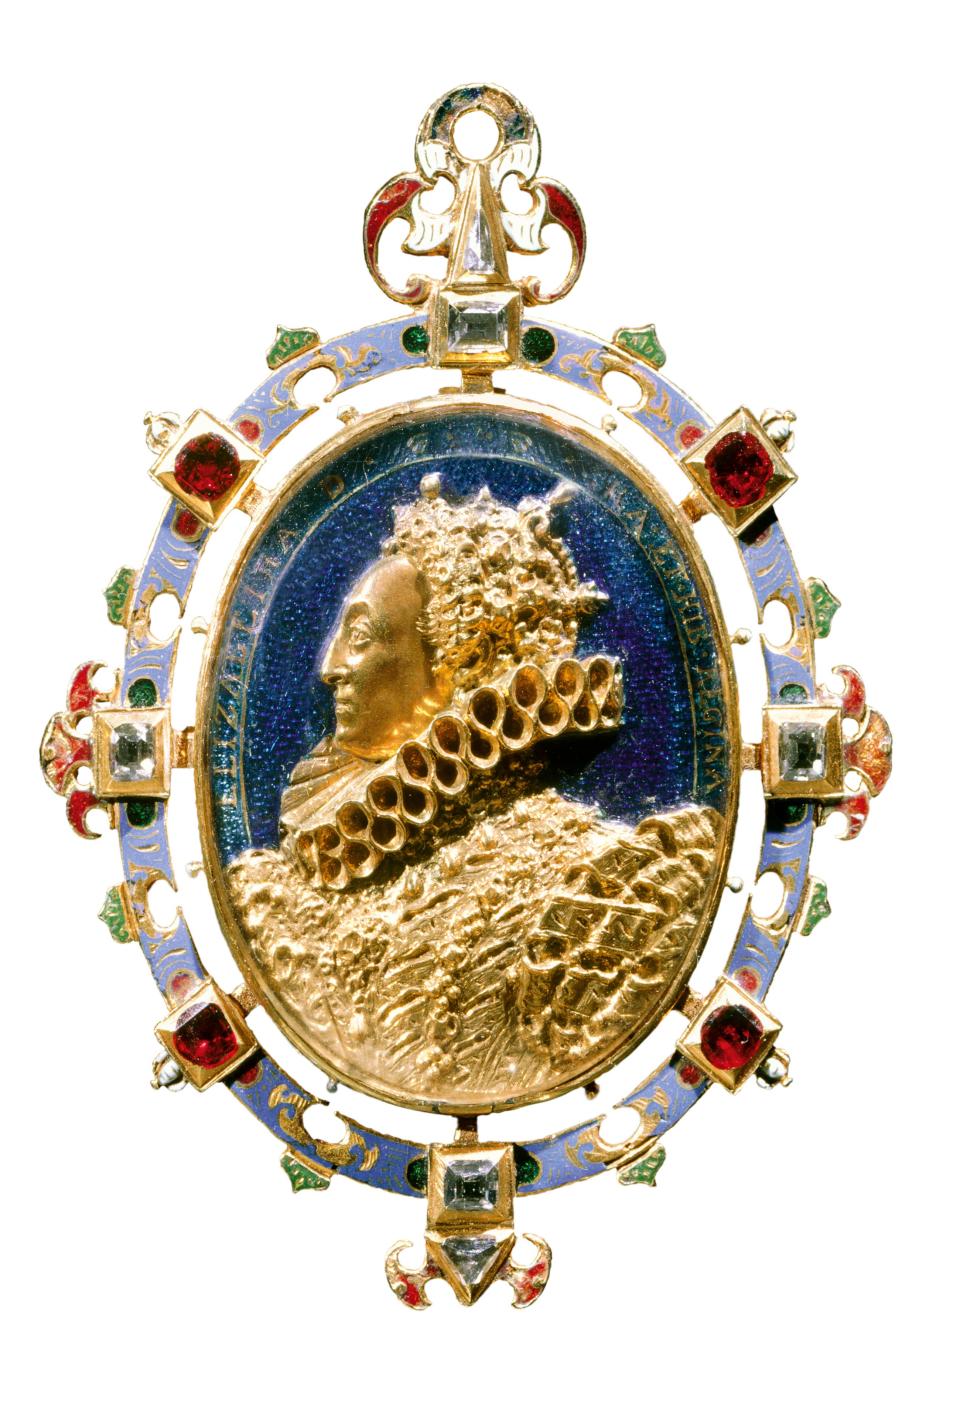 The Heneage Jewel
Portrait of Elizabeth I, Queen of England
England, c. 1595–1600
Enamelled gold, table-cut diamonds, rubies, rock crystal
7 × 5.1 cm
Victoria and Albert Museum, M.81-1935
Given by the Rt. Hon. Viscount Wakefield CBE through The Art Fund
